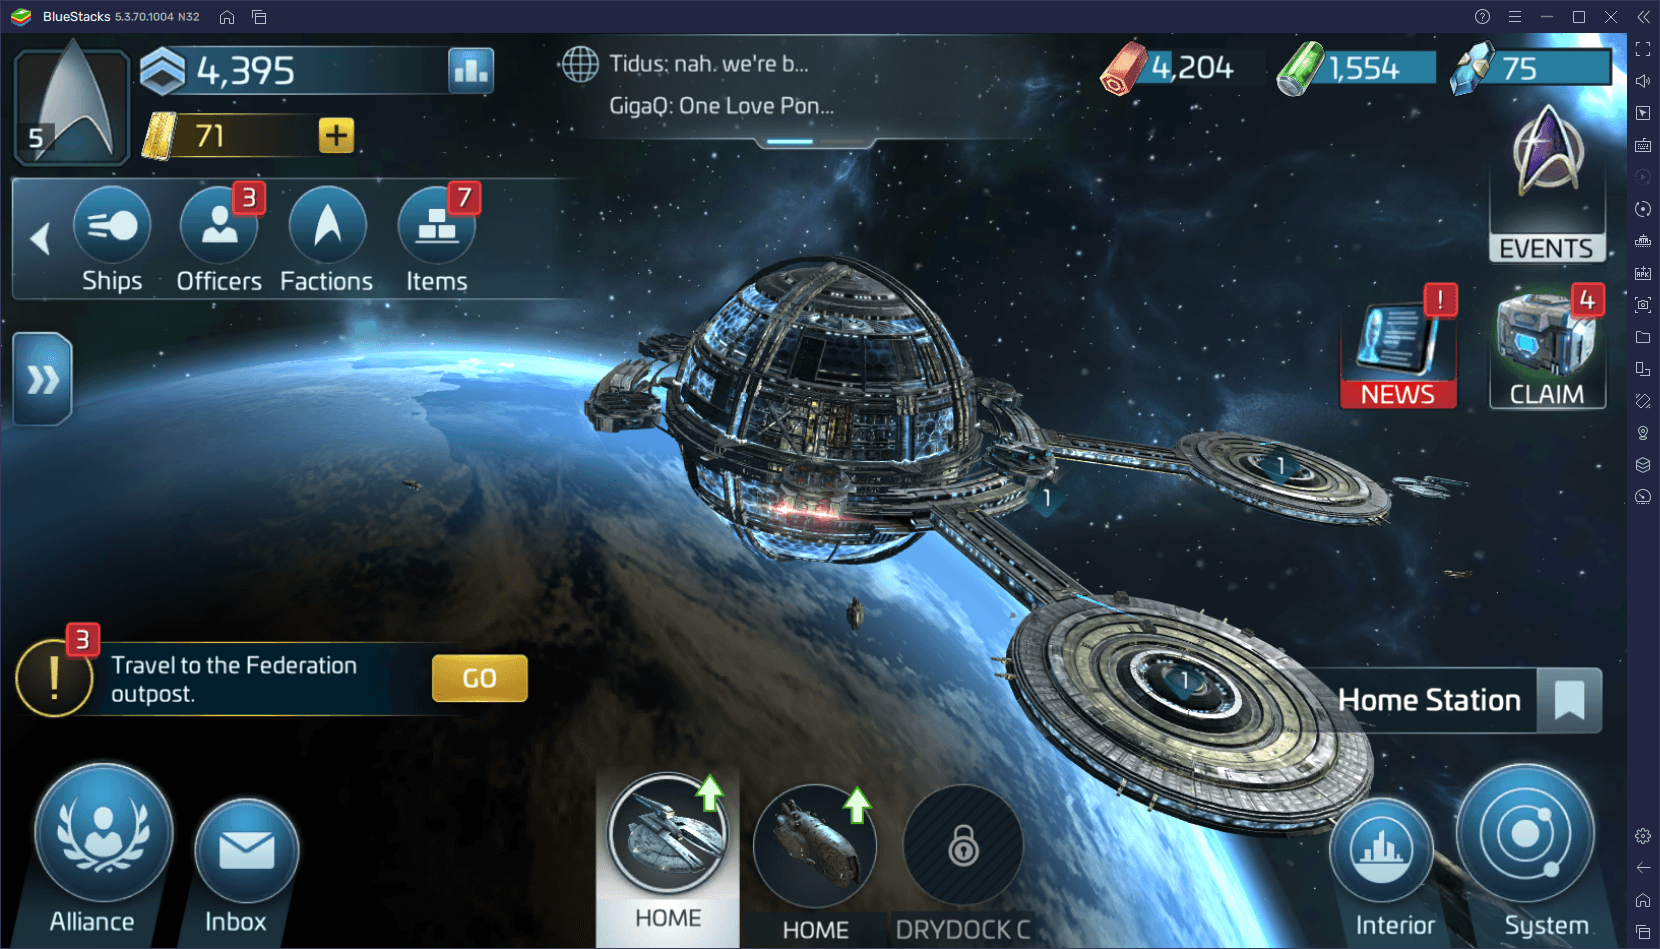 Play Star Trek Fleet Command on BlueStacks to Get the Best Controls, Graphics, Performance, and More